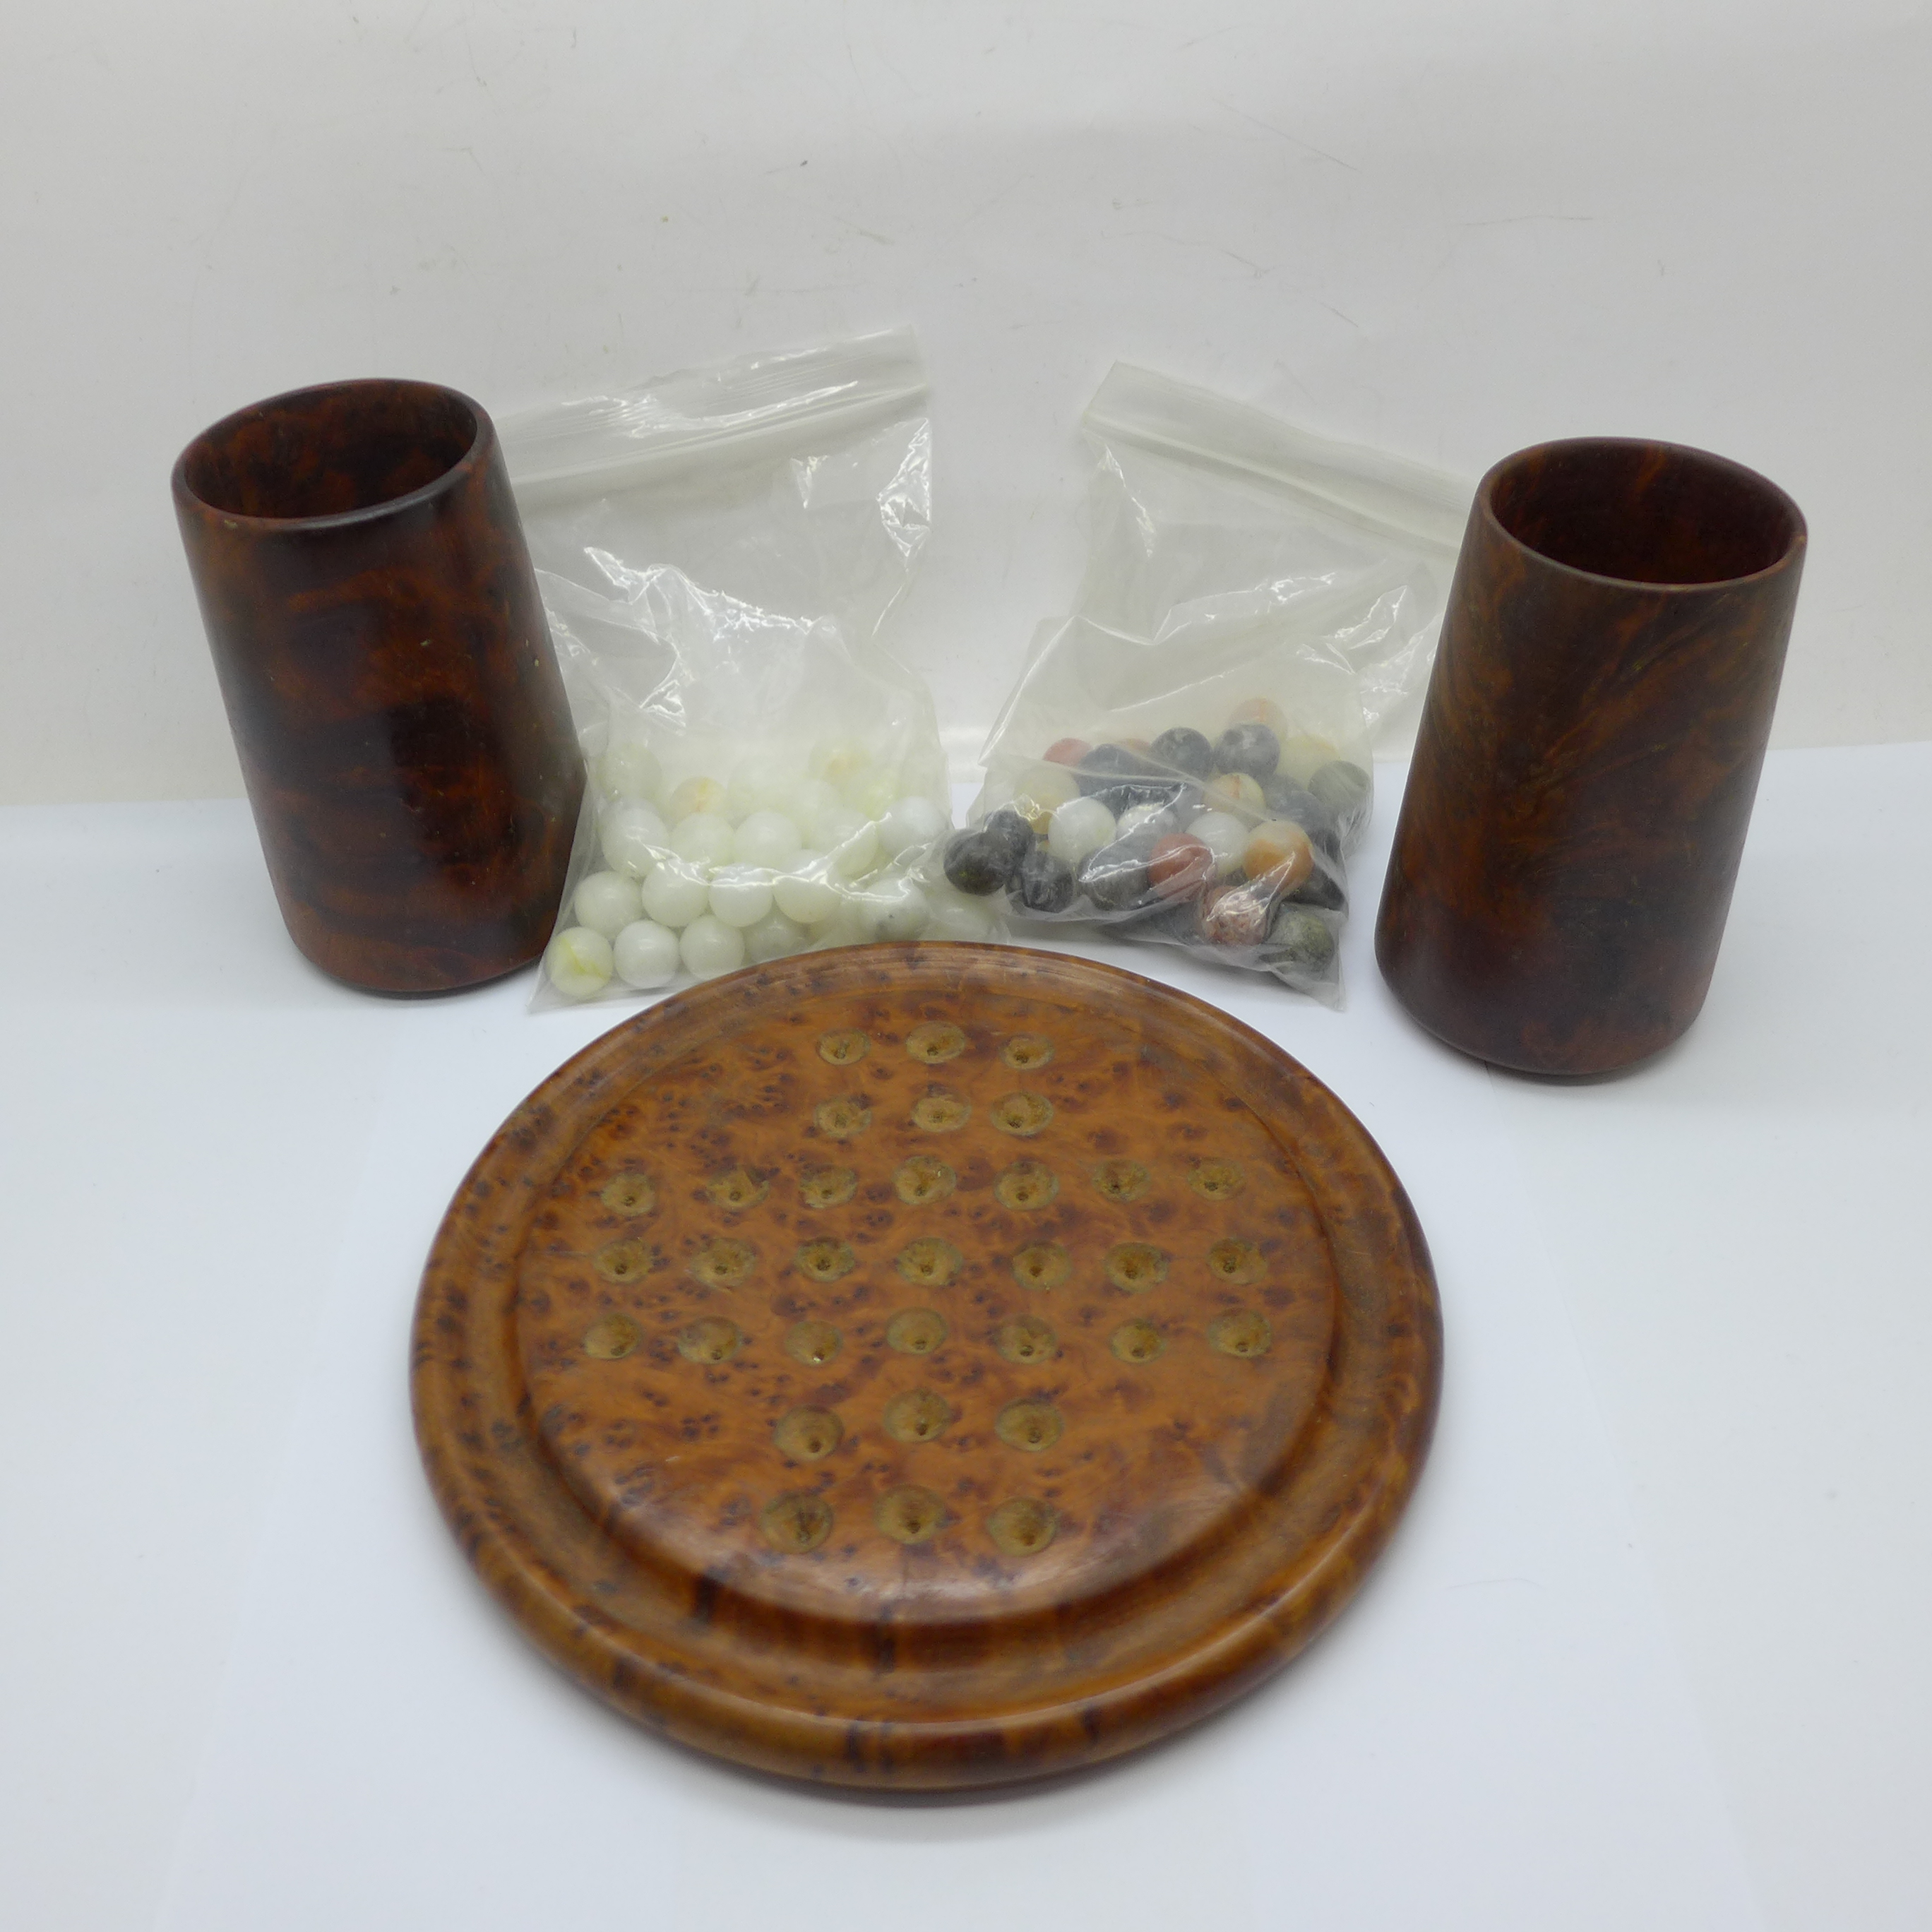 A thuya wood solitaire set with two sets of natural stone marbles and two dice cups